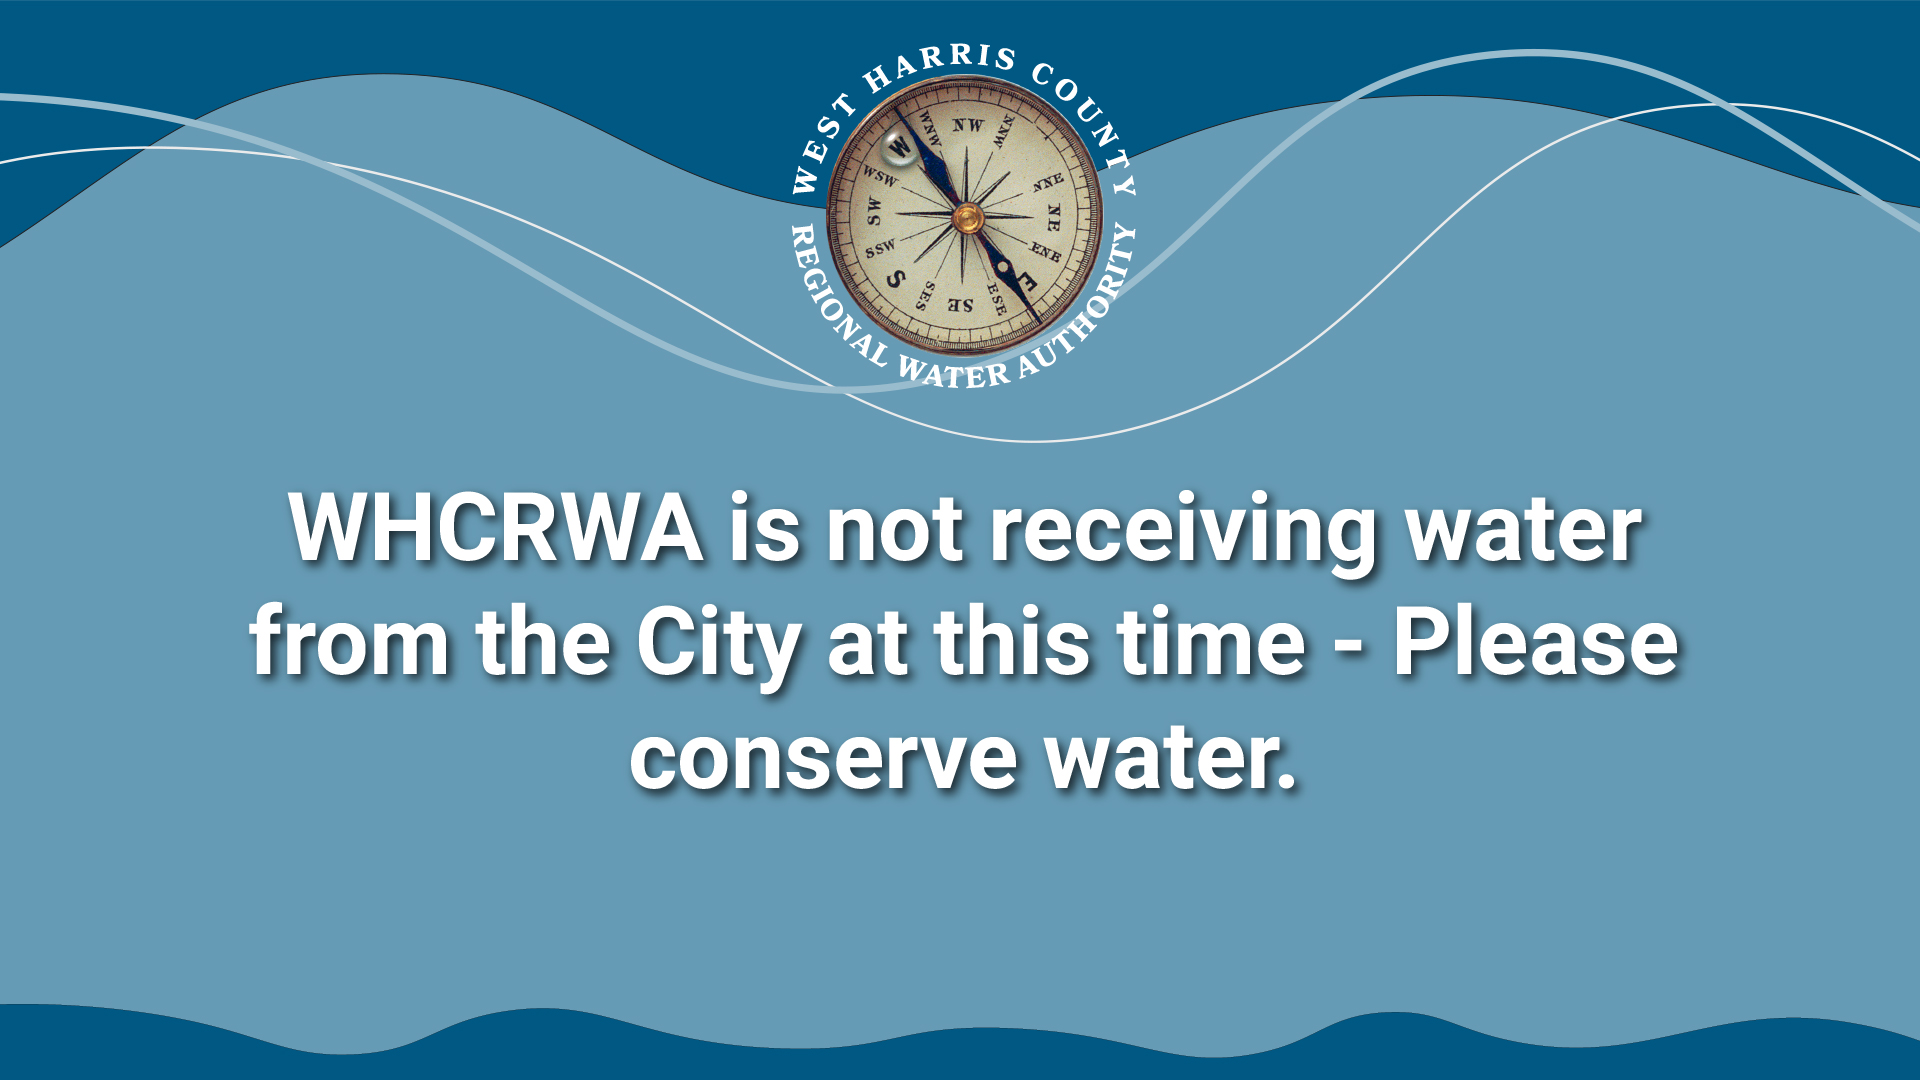 WHCRWA is not receiving water from the City at this time - Please conserve water